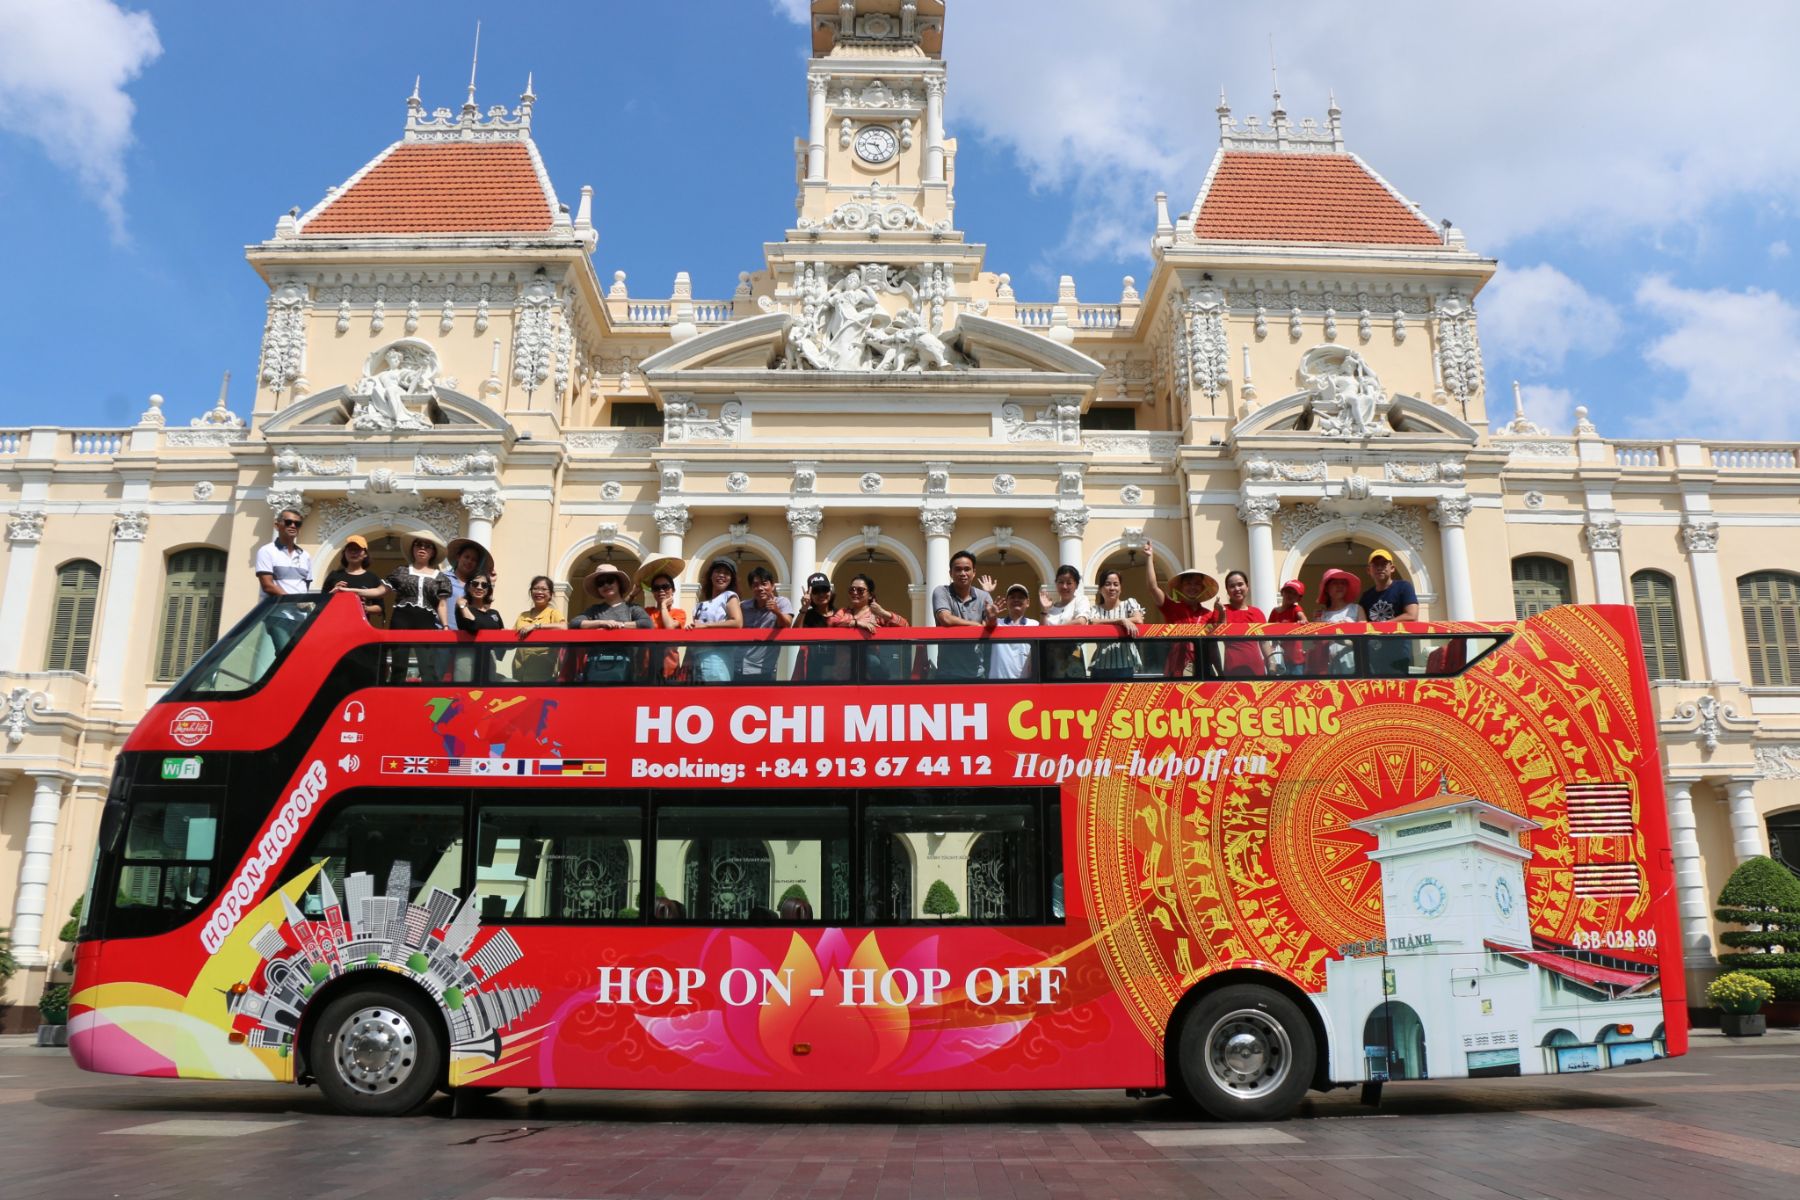 Take a hop-on hop-off bus to go around the city